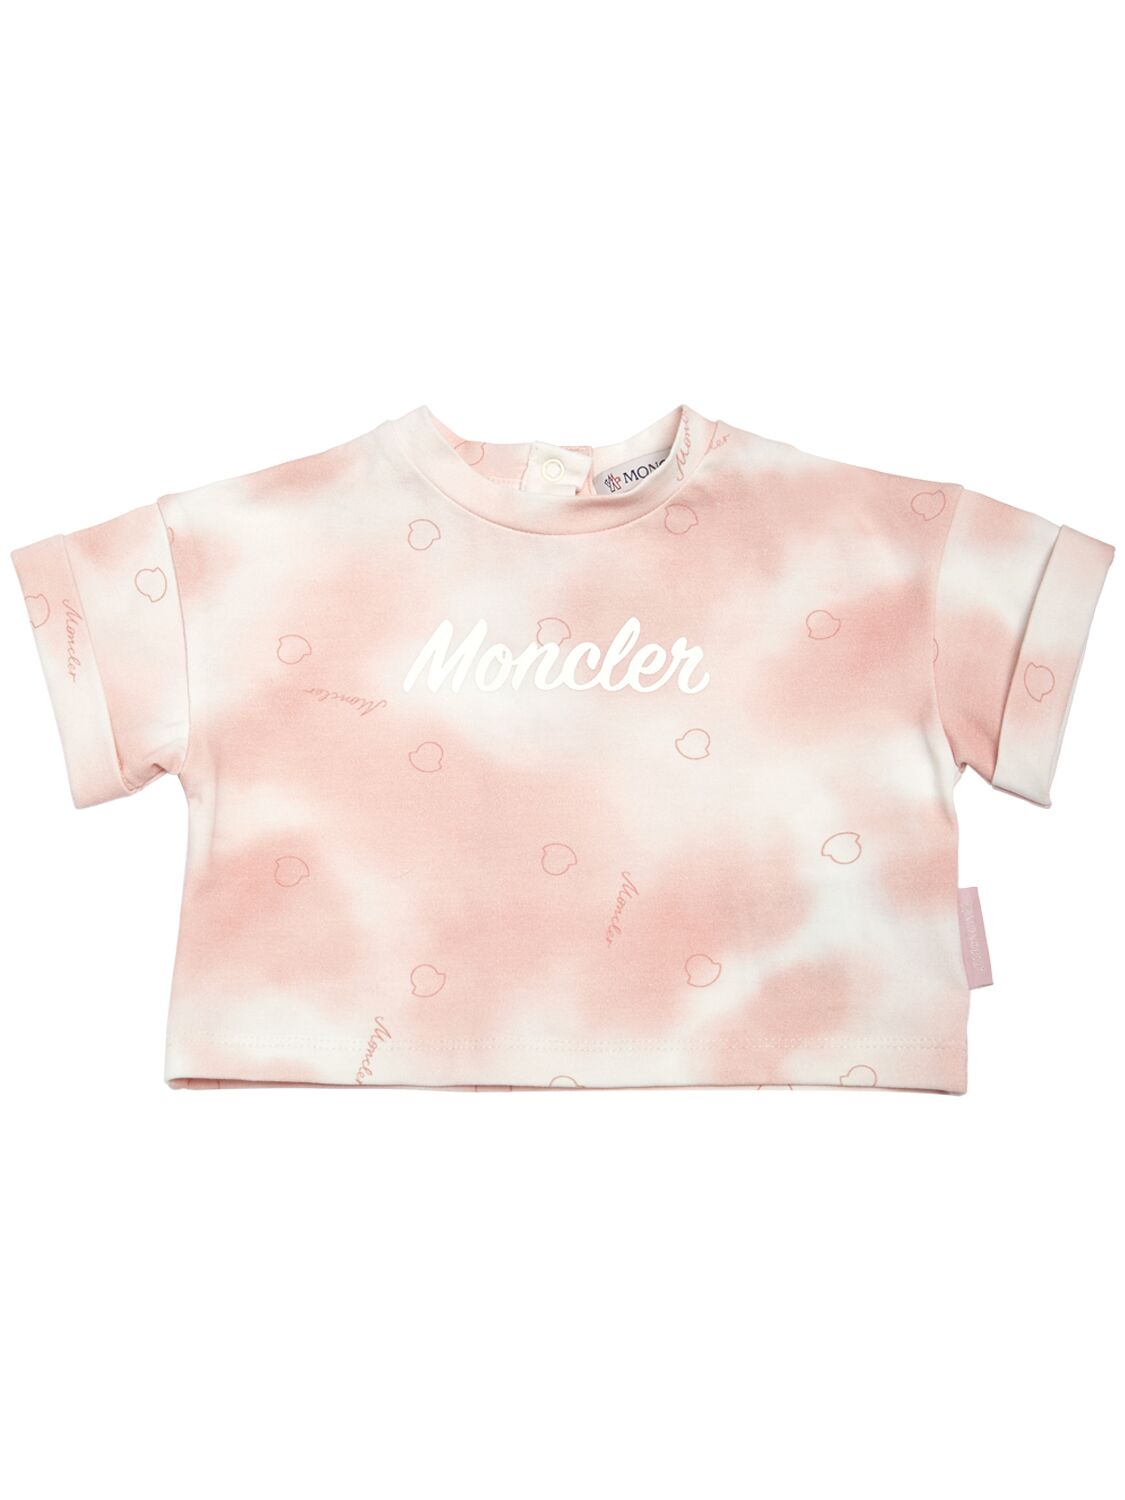 Moncler Kids' All Over Printed Cotton T-shirt In Pink